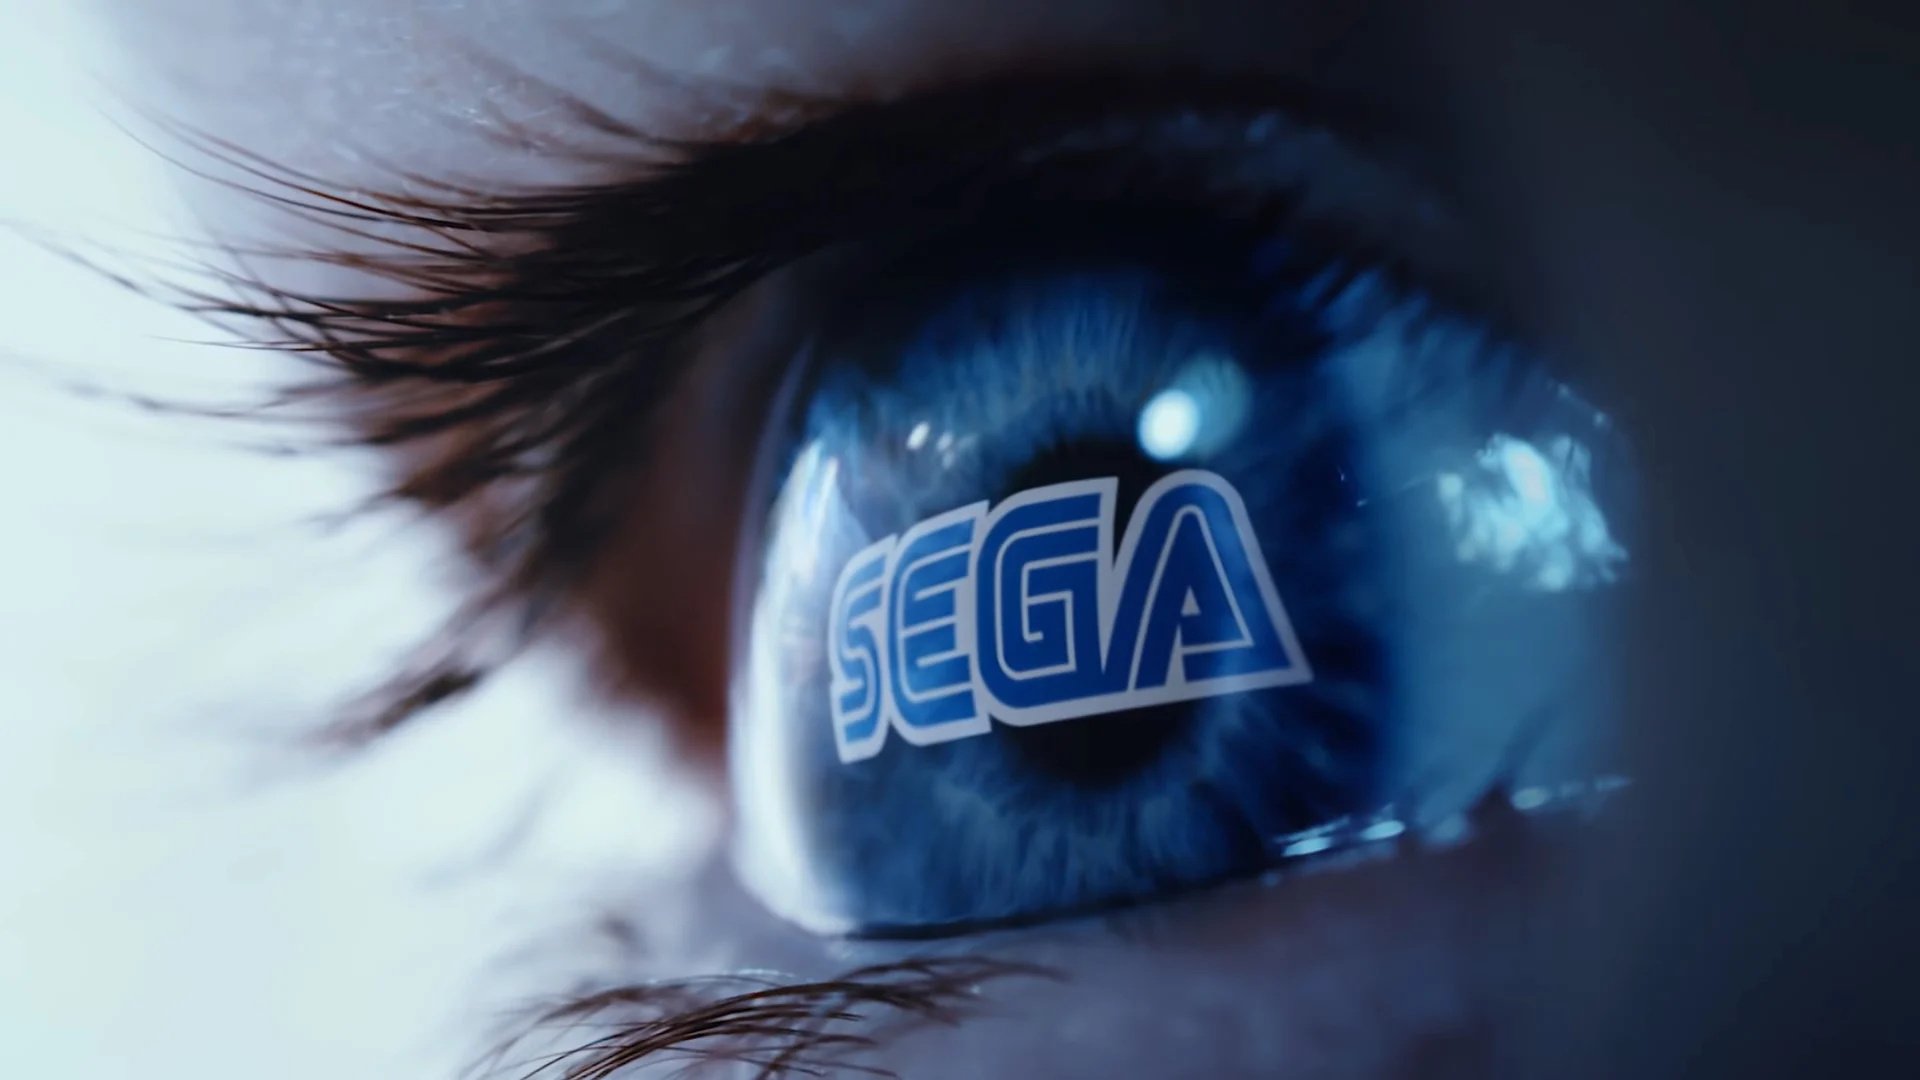 Sega says it plans to release a 'Super Game' within the next five years